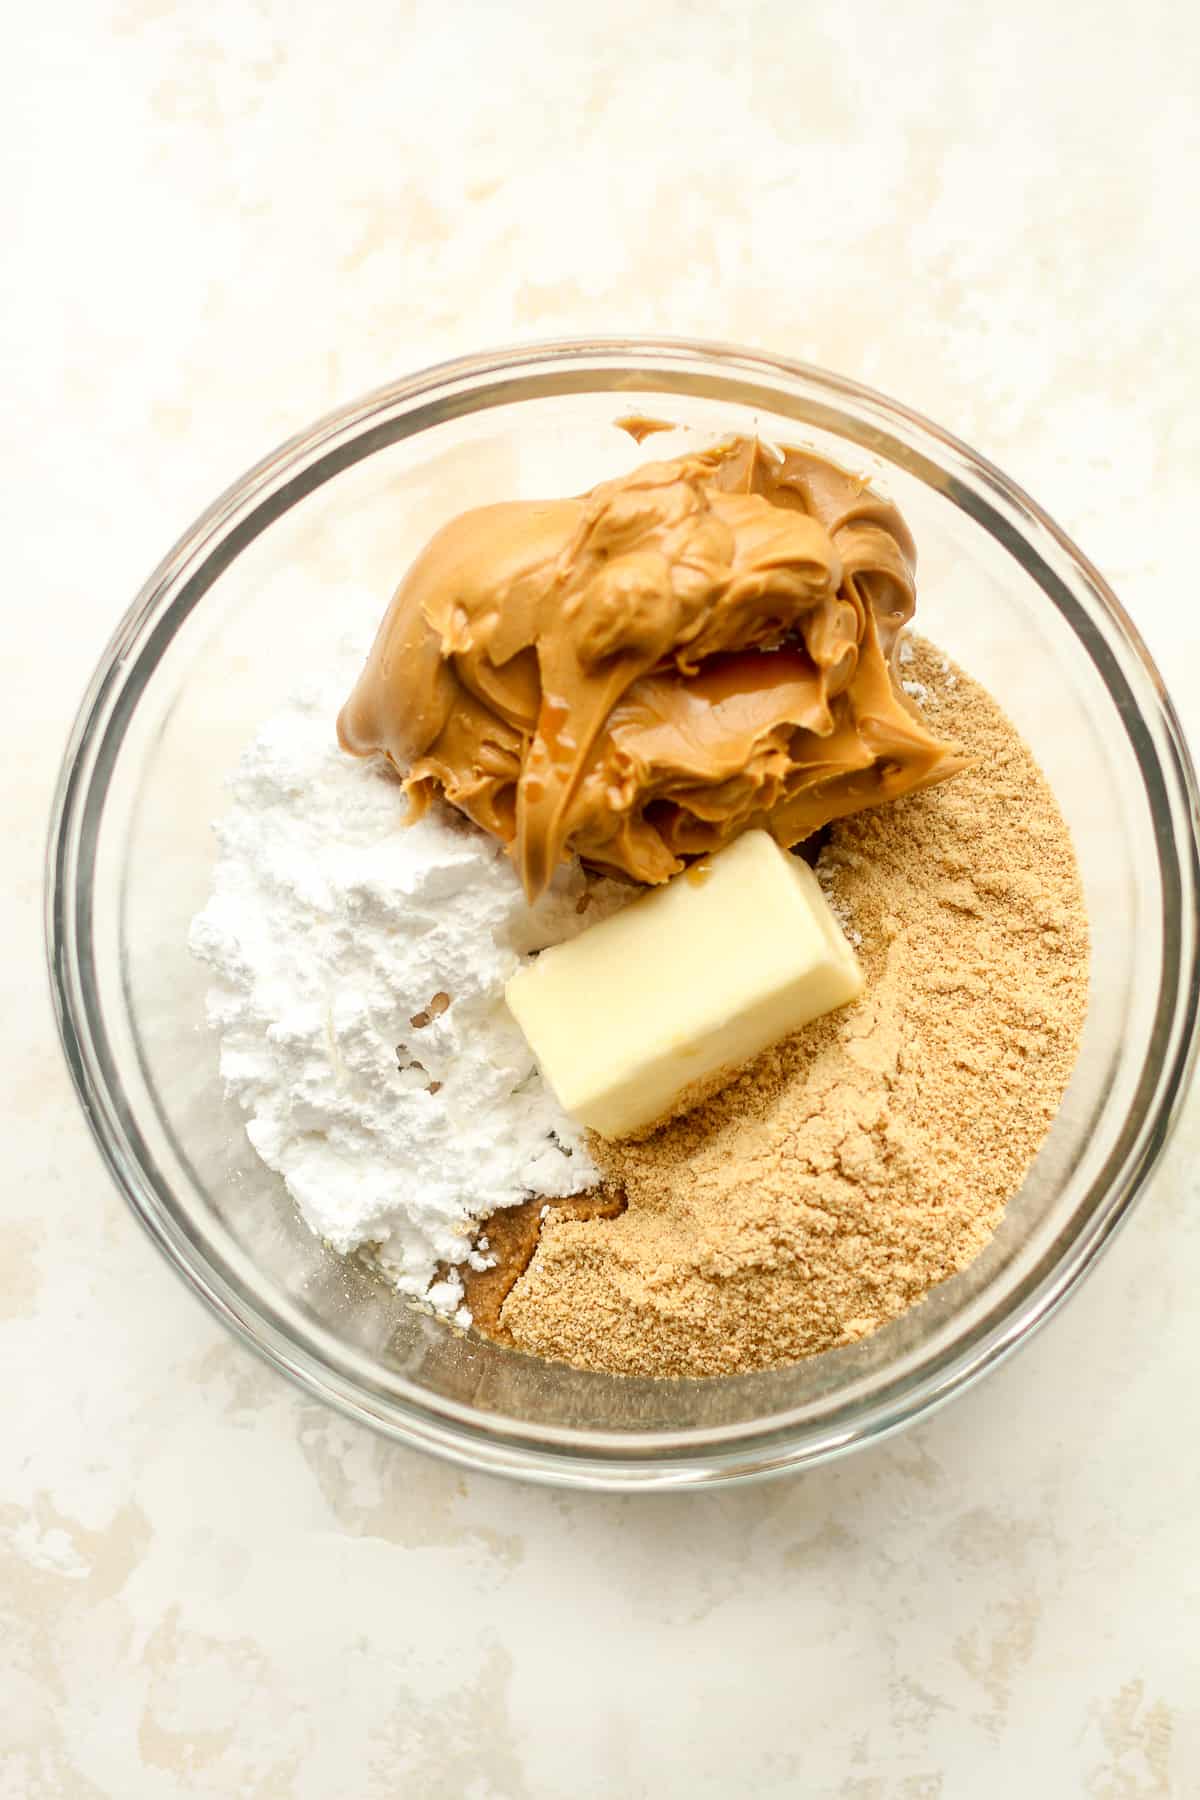 A bowl of the peanut butter ingredients.